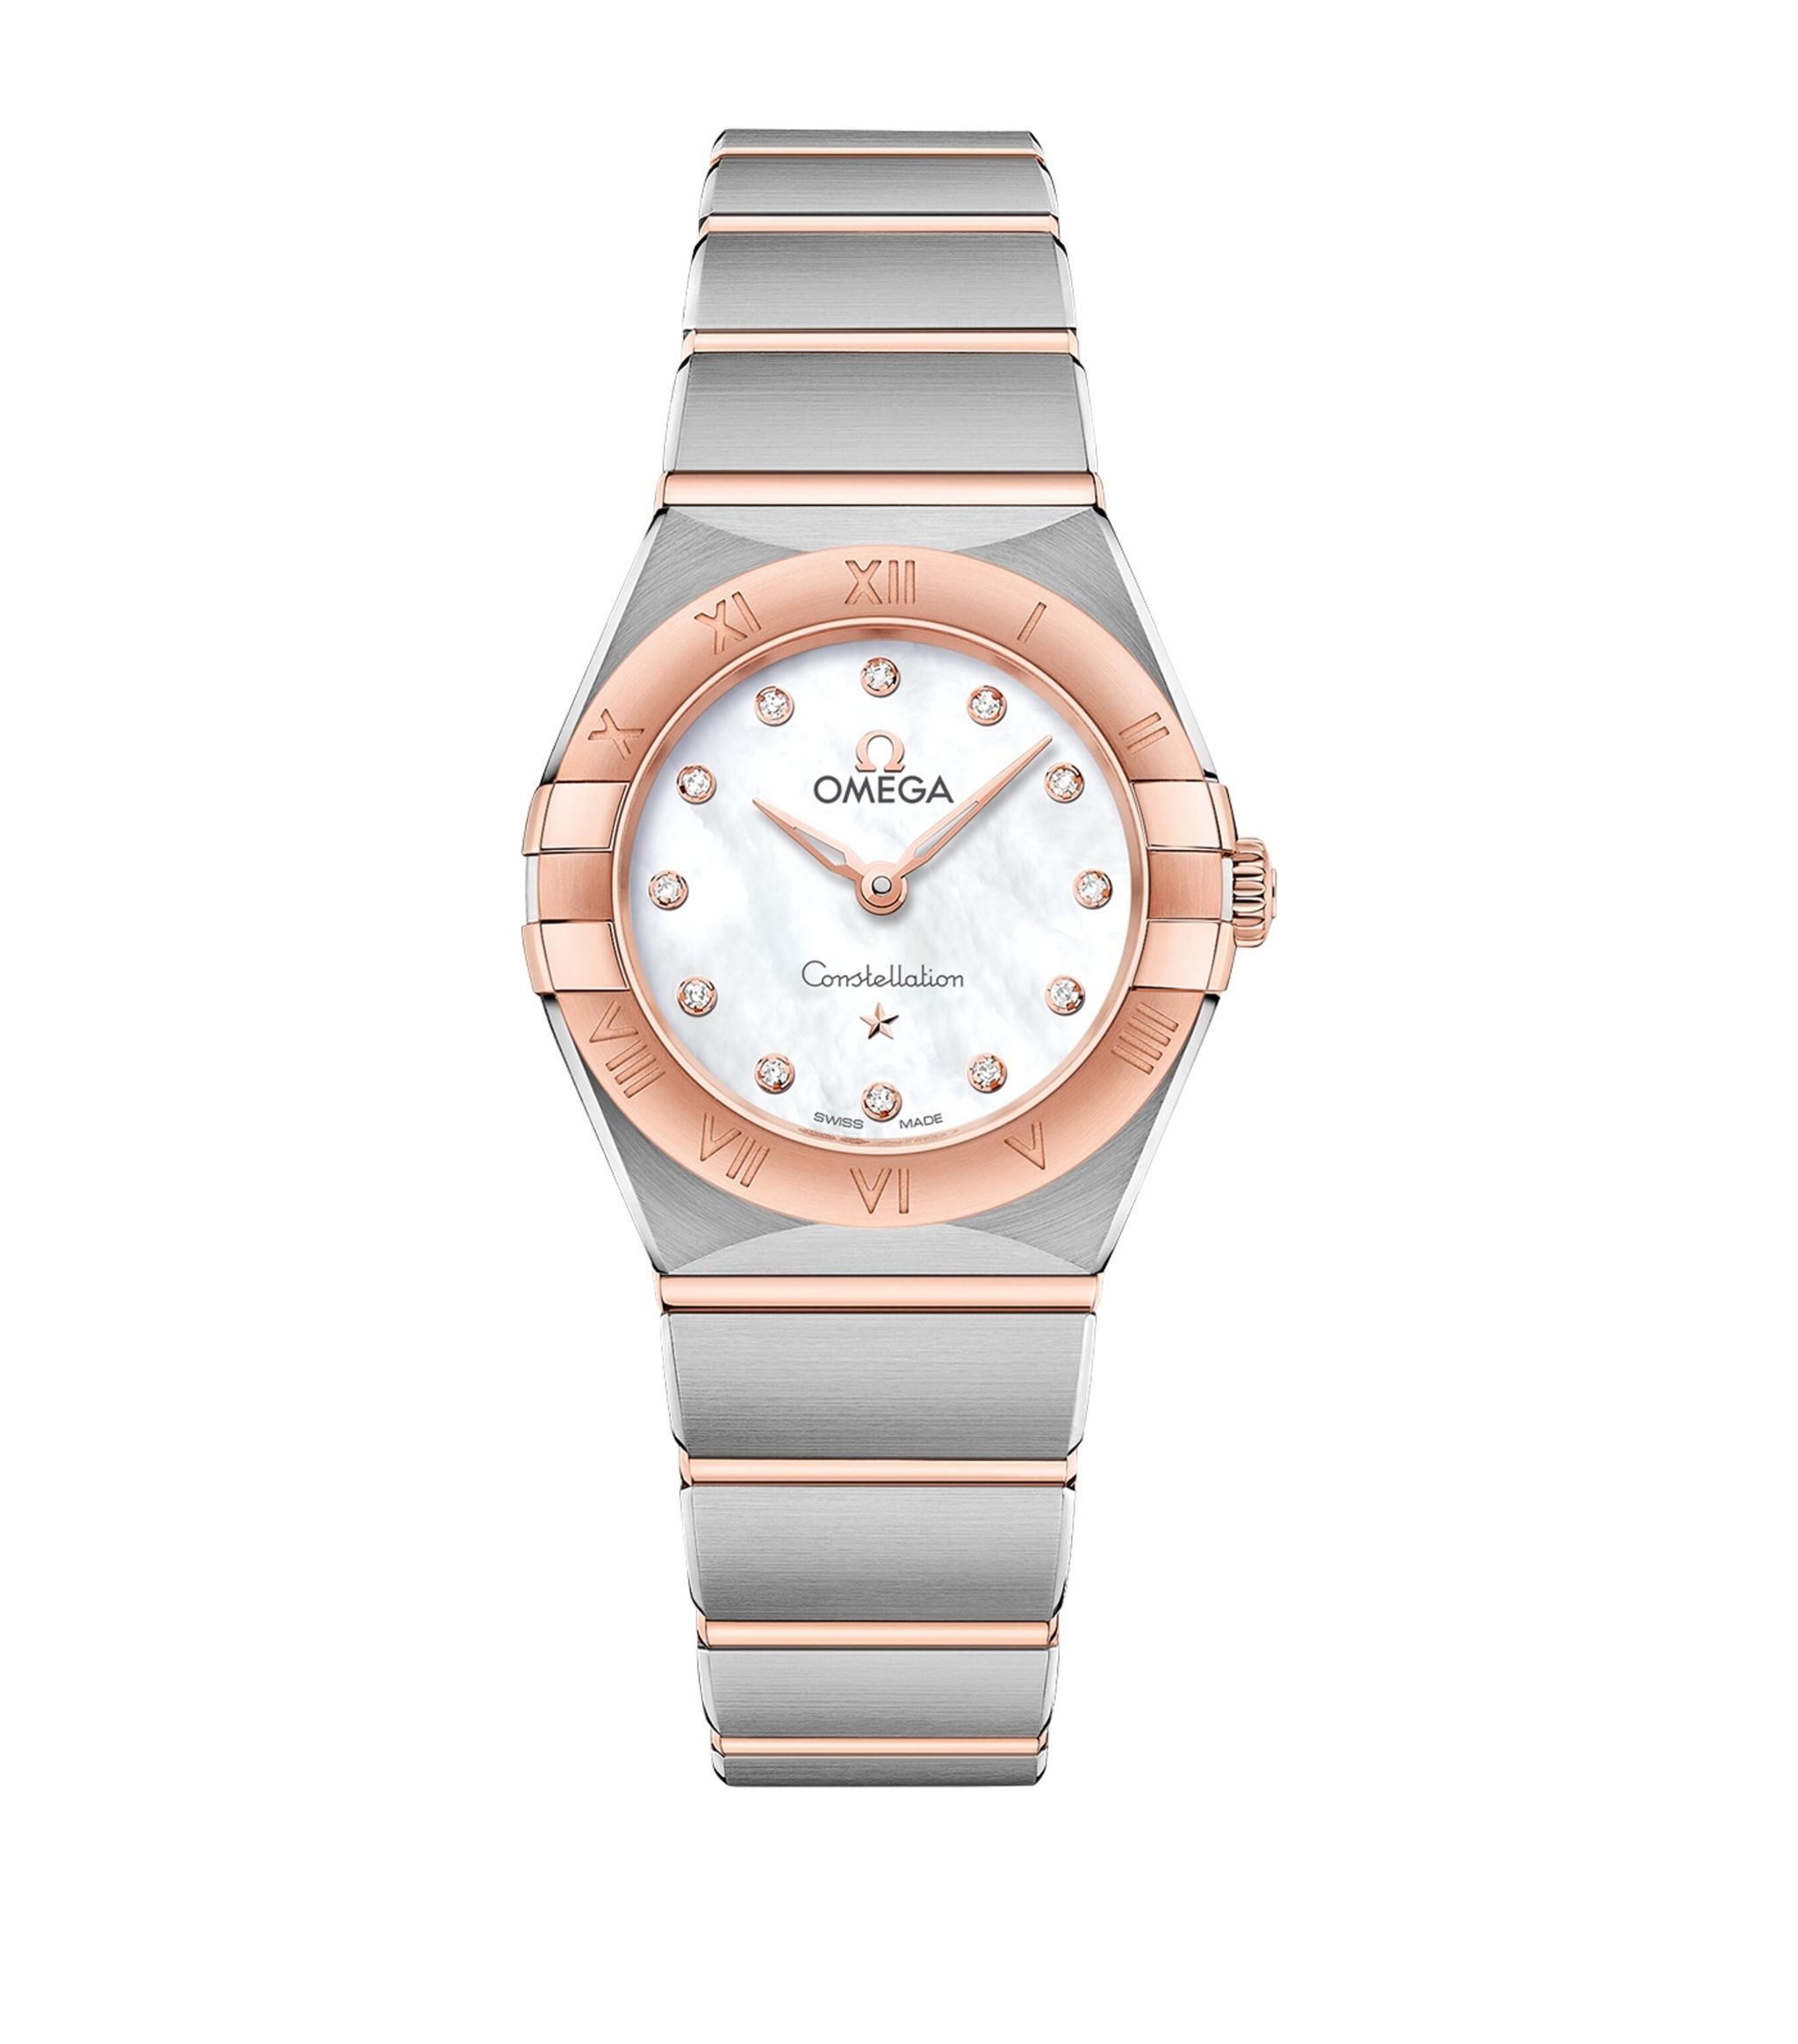 Stainless Steel, Sedna Gold and Diamond Constellation Watch 25mm | Harrods